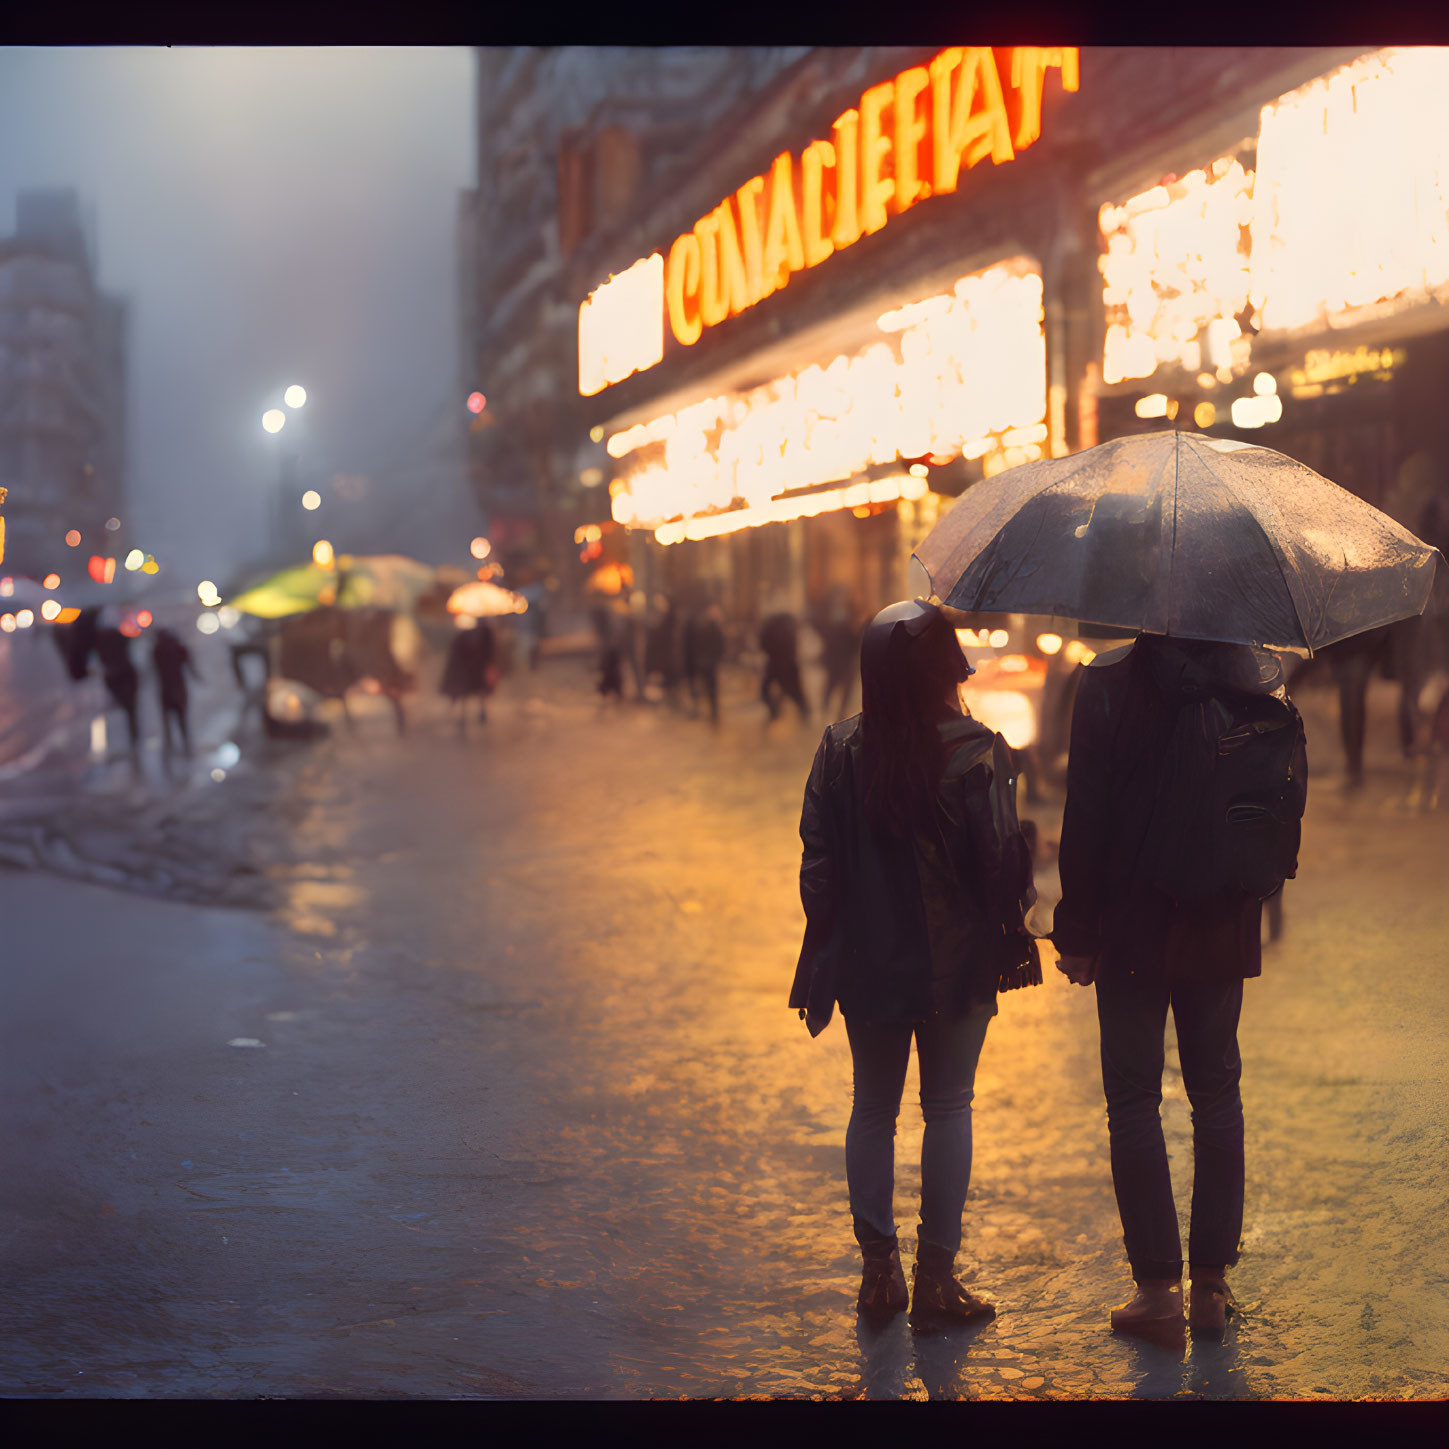 Two people sharing an umbrella in the rain under city lights